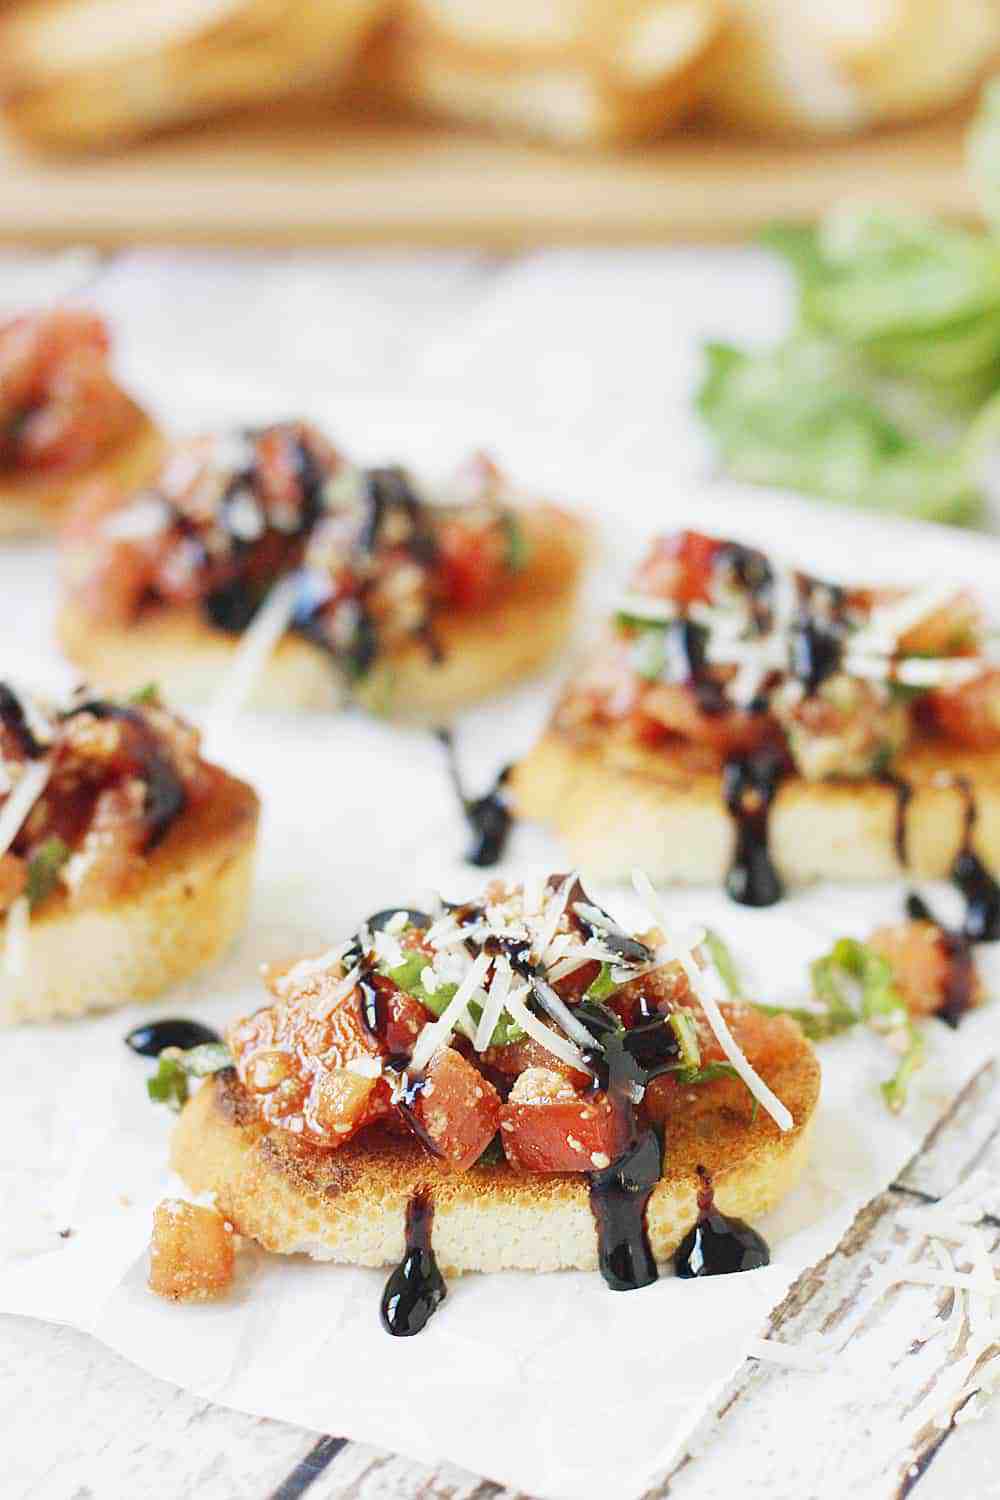 Easy Tomato Bruschetta Recipe - Top toasted baguette slices with this easy tomato bruschetta for an appetizer full of tomato, basil, balsamic flavor that is perfect for holiday parties! #bruschetta #tomato #halfscratched #appetizer #tomatobruschetta #cooking #baking #easyrecipe #holidayrecipe